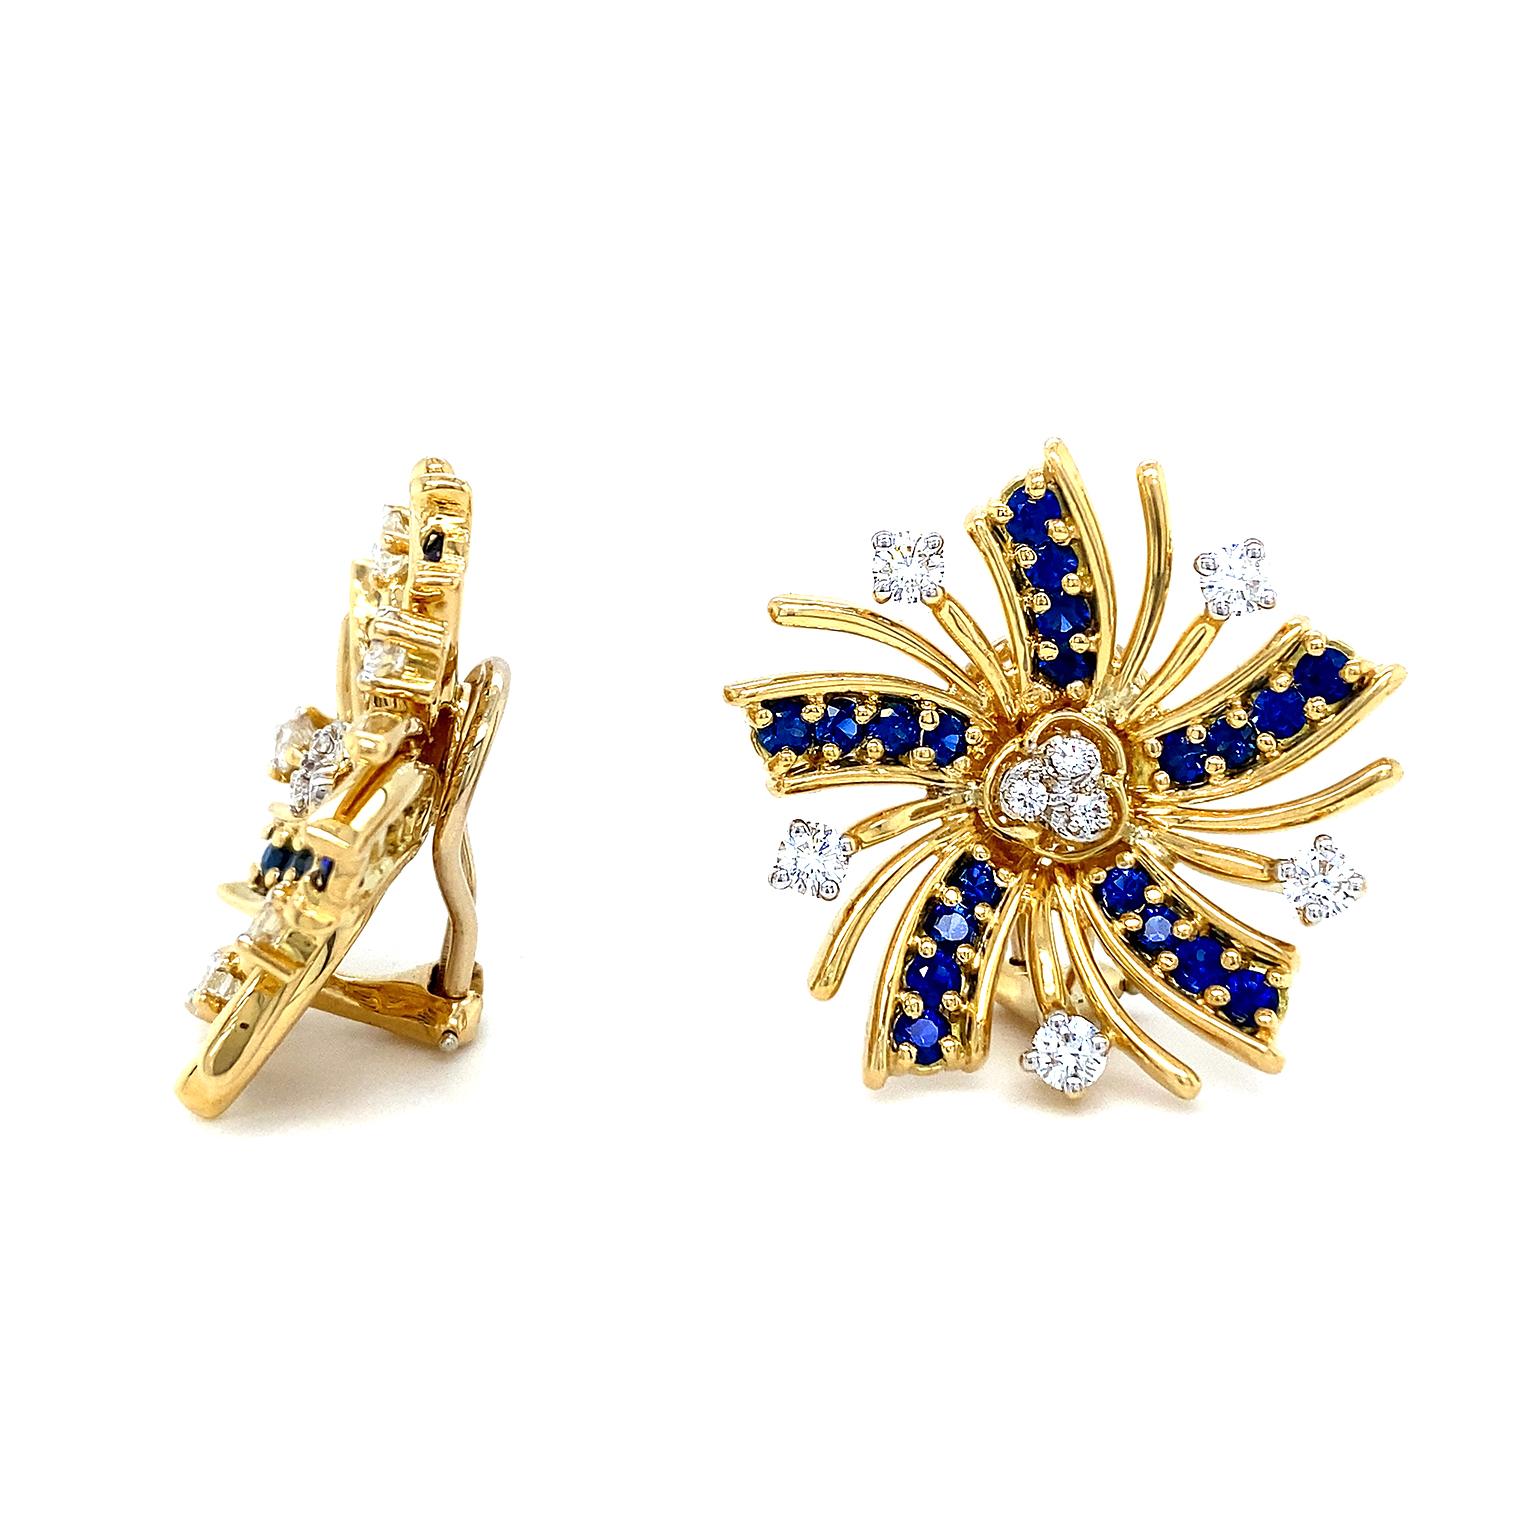 Diamonds and sapphires join gold for festive radiance. In the center of the design are 3 brilliant cut diamonds encrusted in 18k yellow gold. 5 curved beams of sapphires pave set in gold emit outward. In between each beam are 2 slender gold strands,